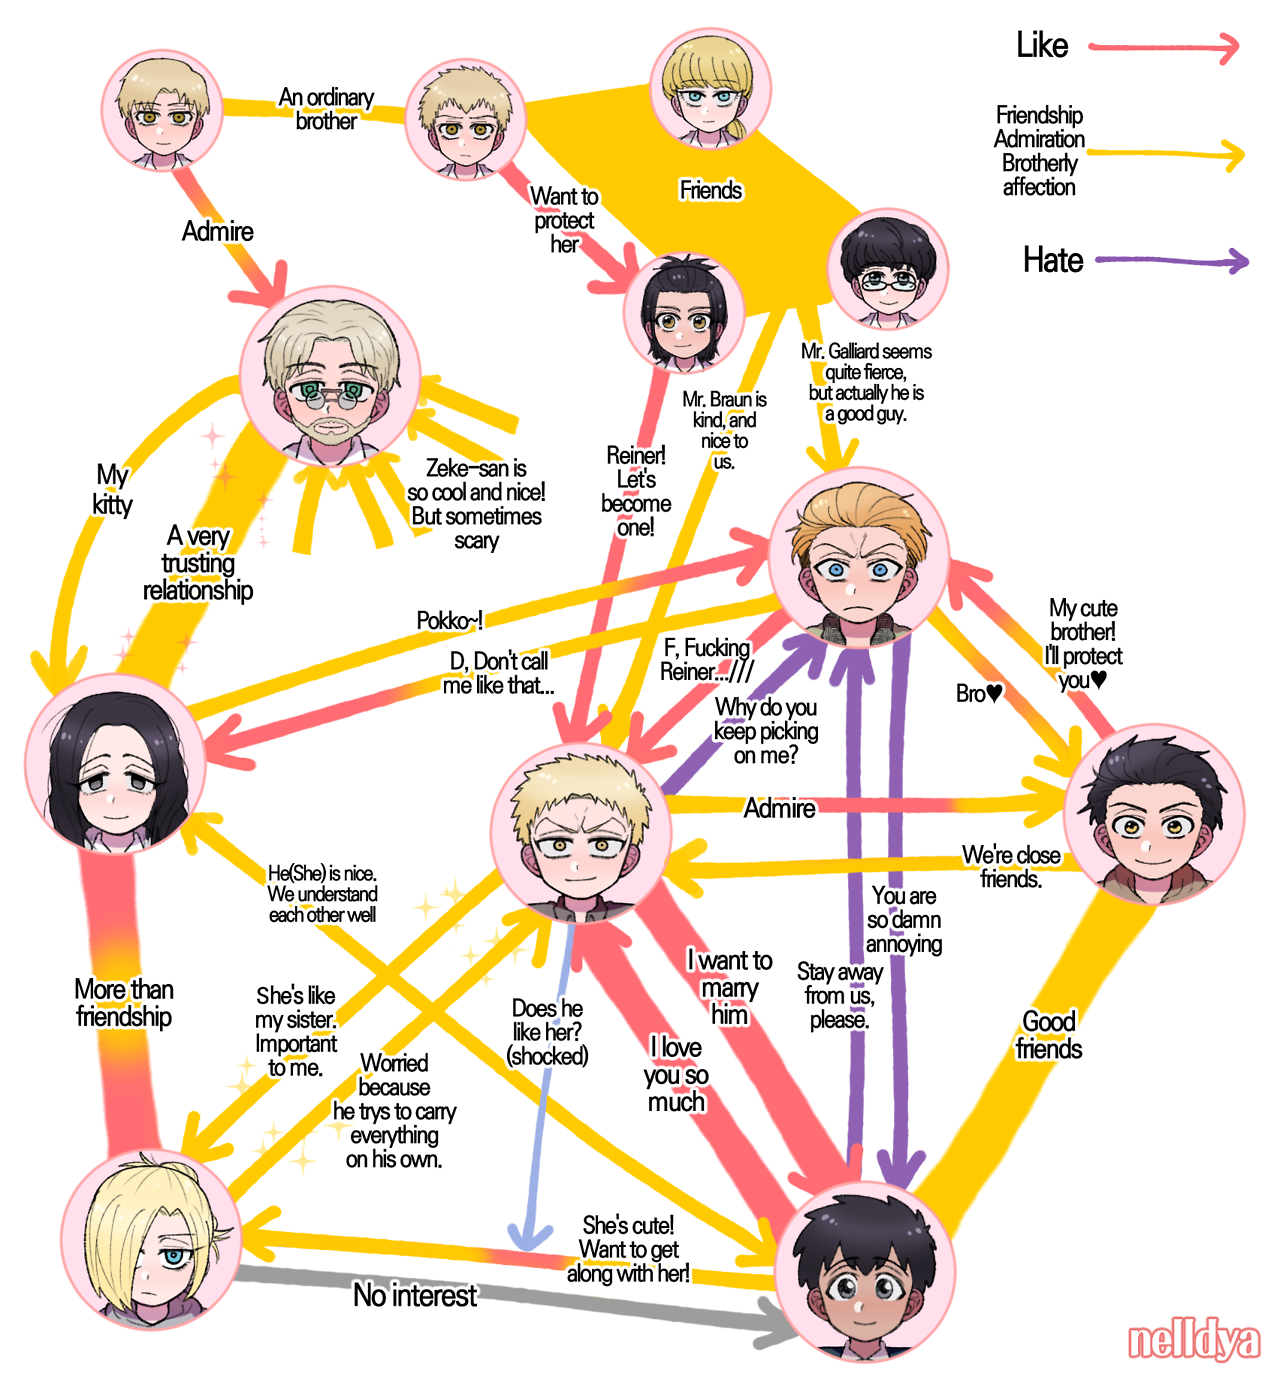 nelldya: Marley corps relationship diagram based on my personal opinion and headcanon…